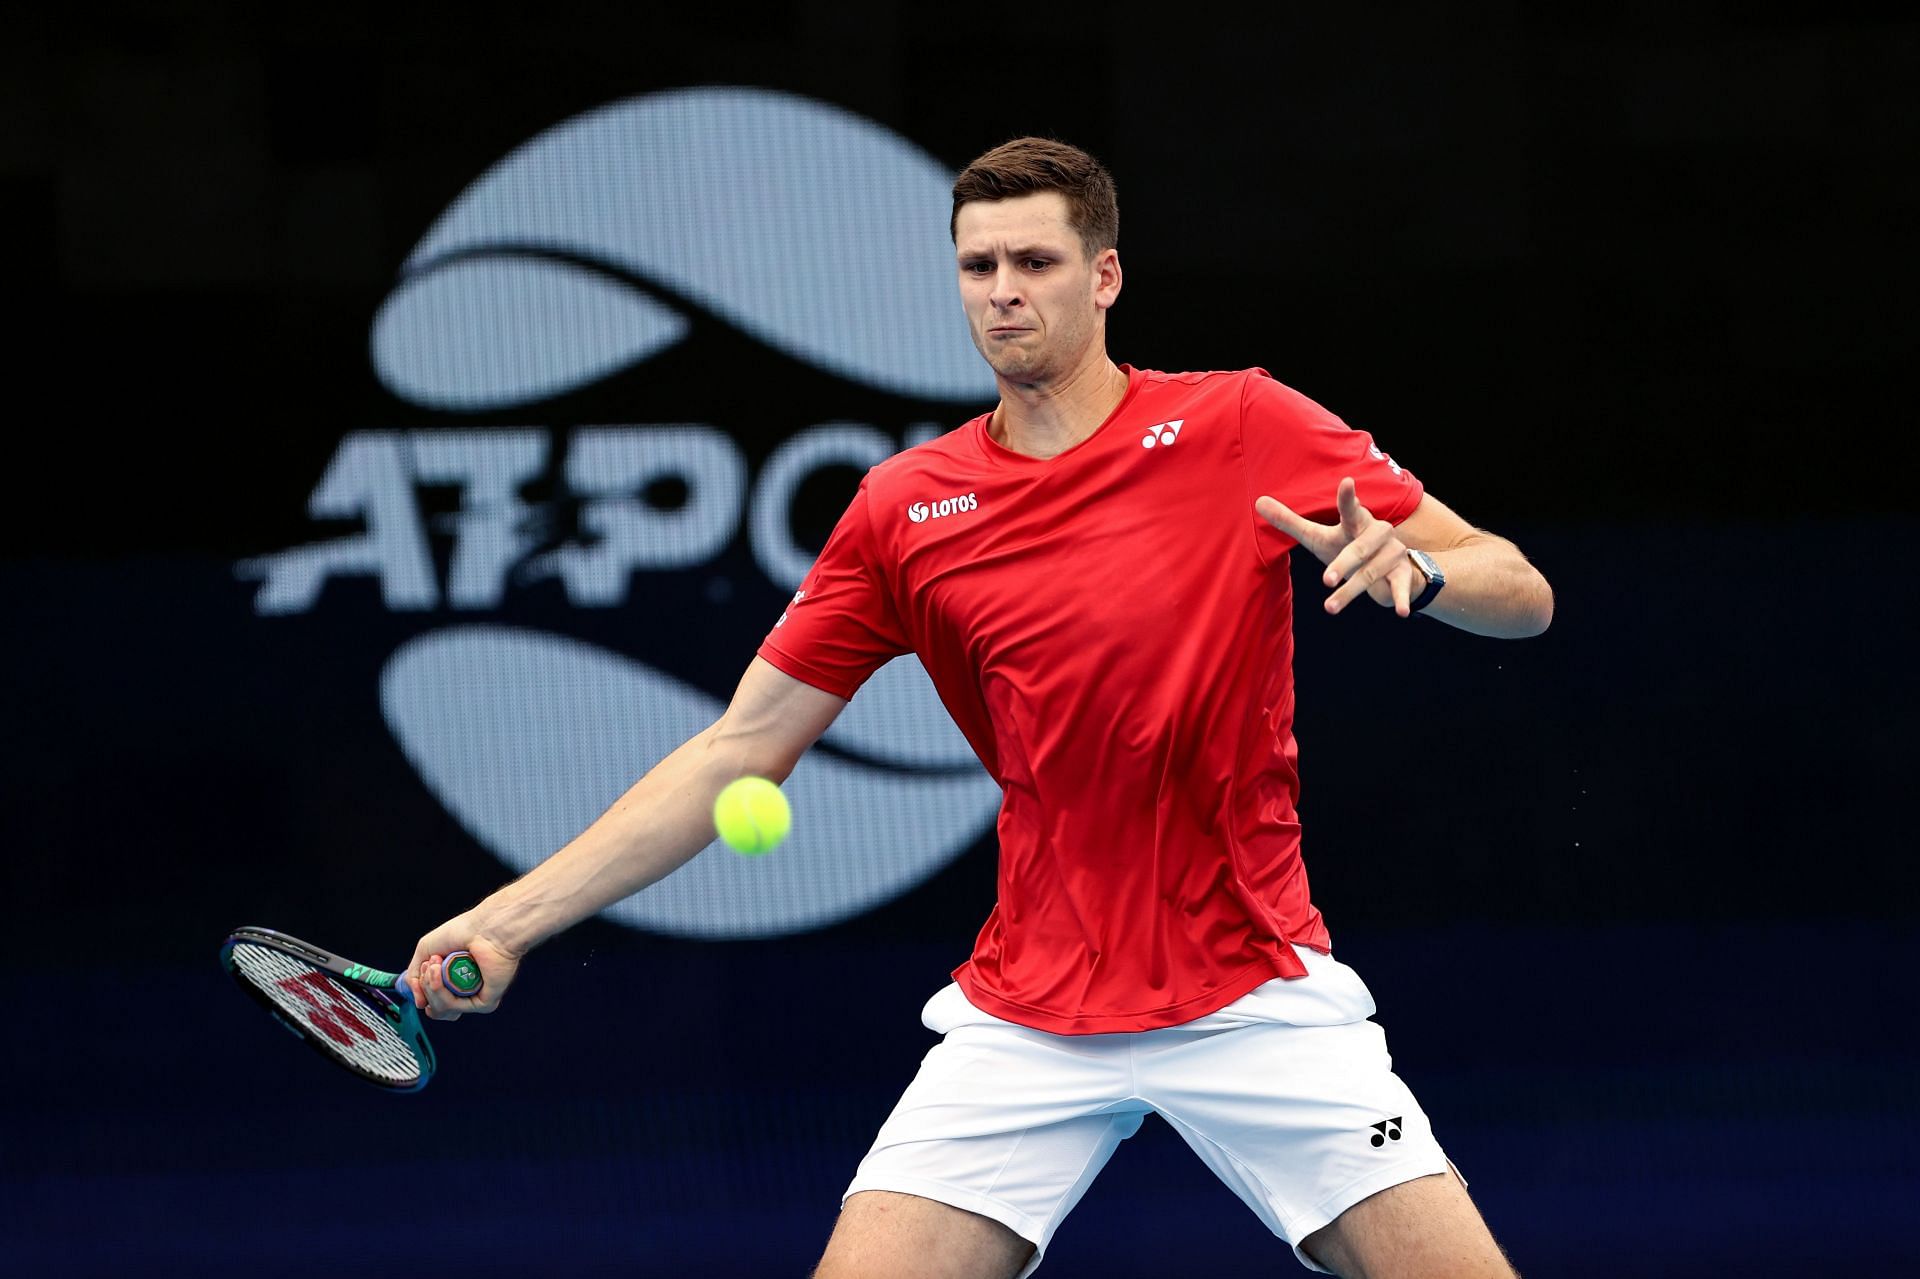 ATP Cup 2022 Day 5 TV schedule, start time and live stream details